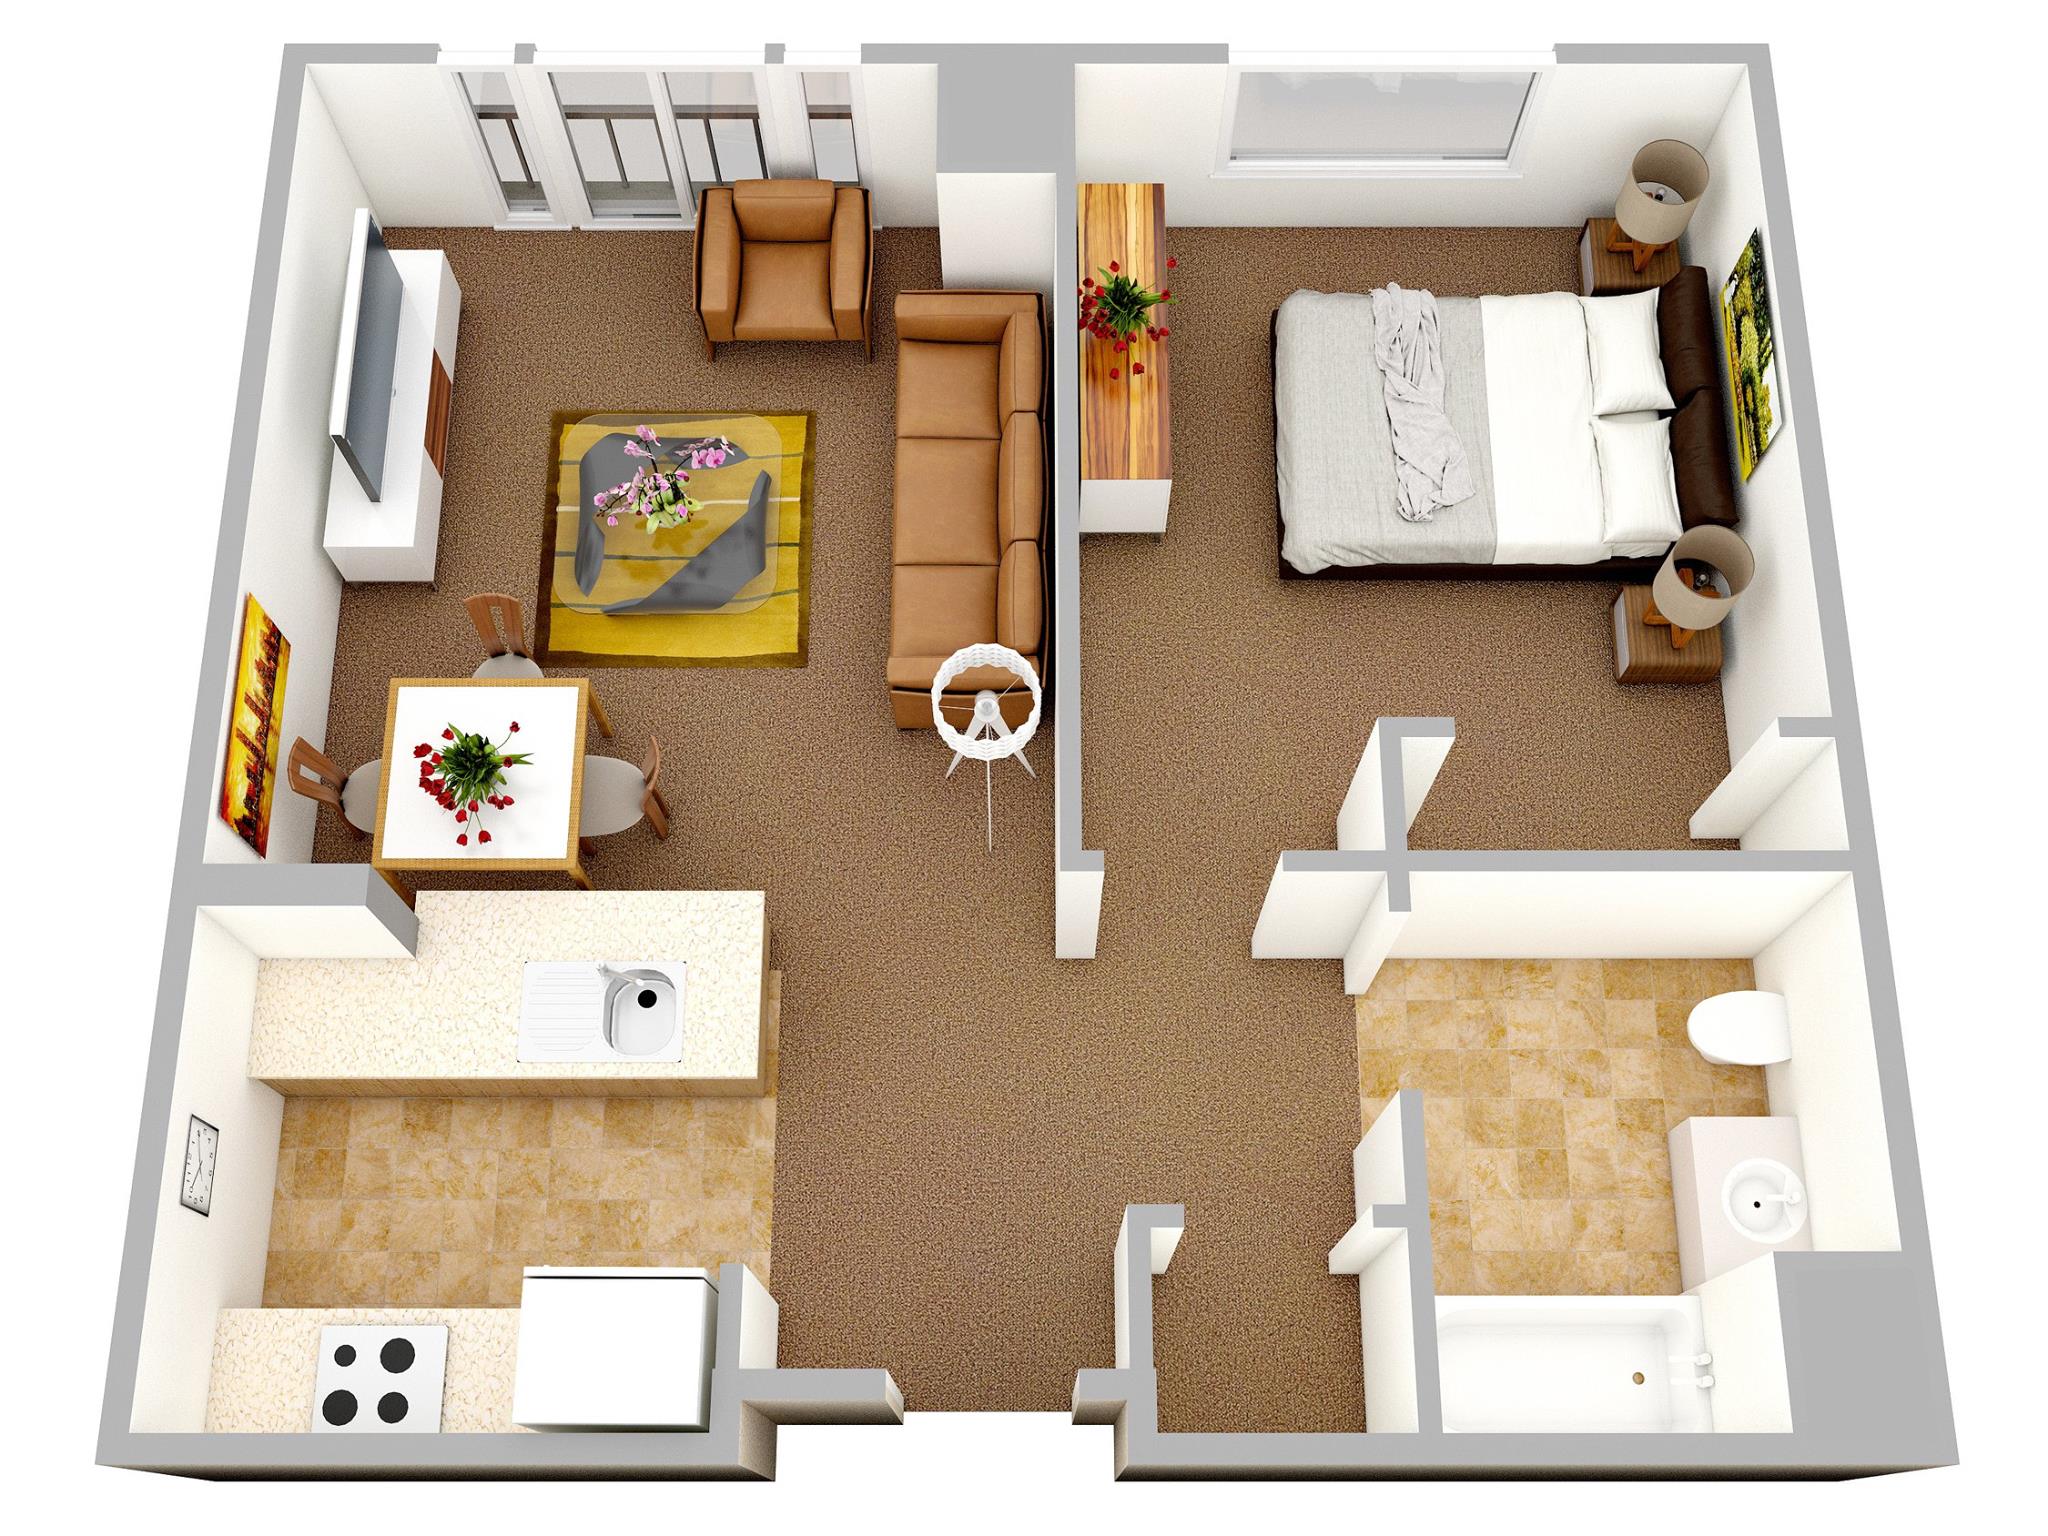 one bedroom house plans